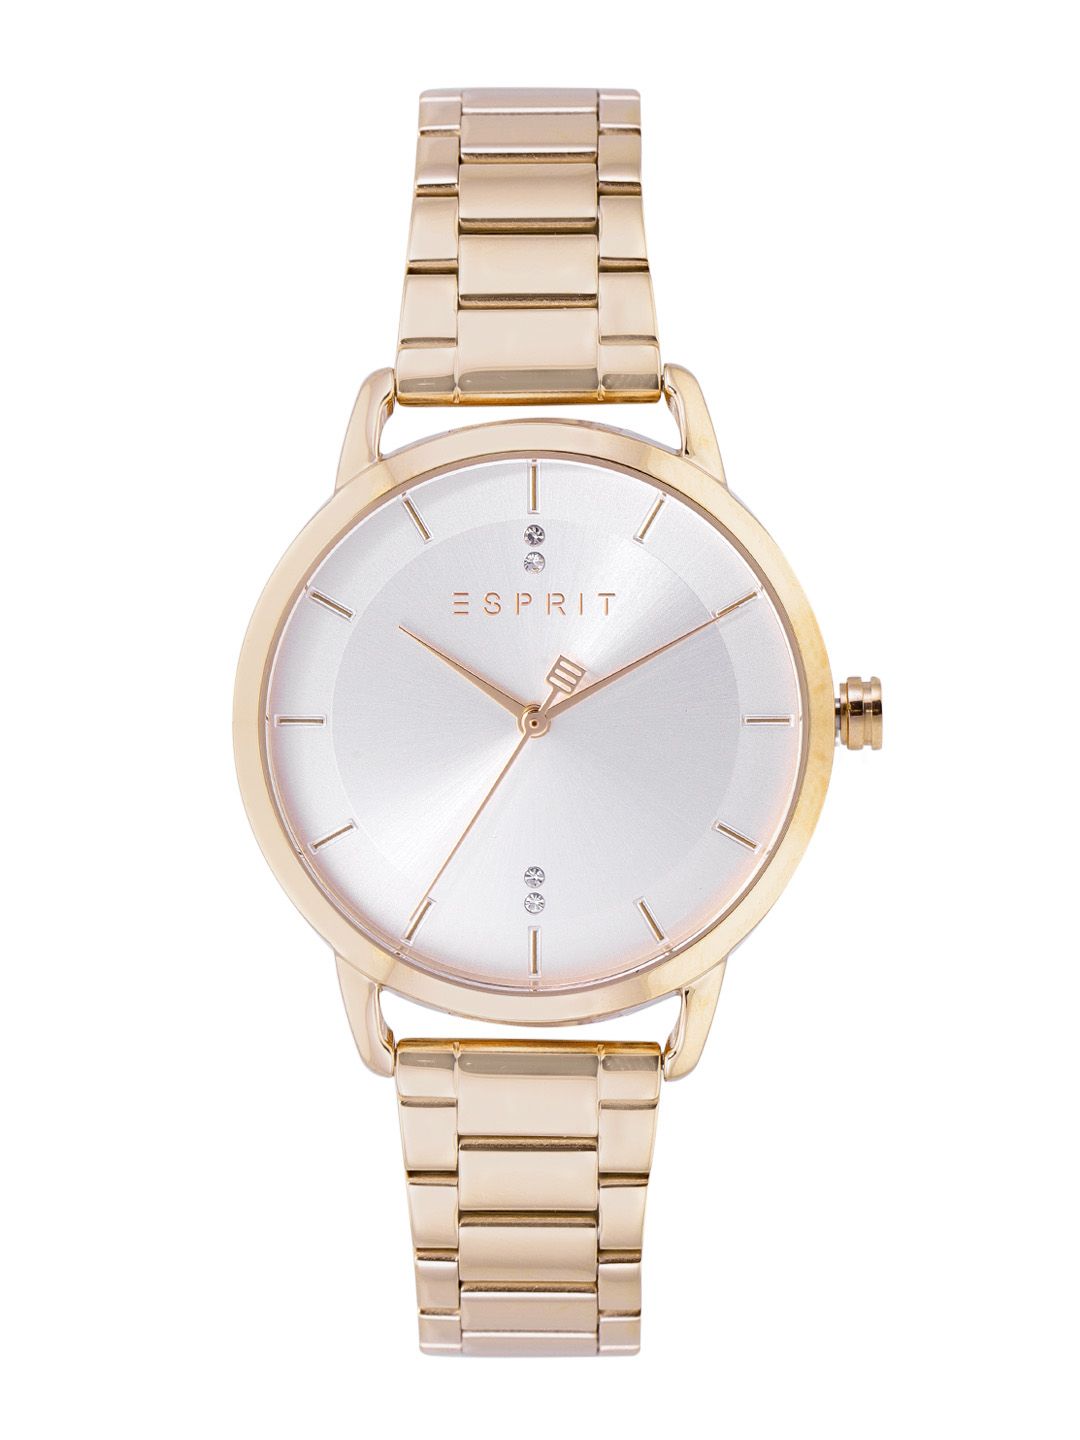 ESPRIT Women Silver-Toned Dial & Gold Toned Bracelet Straps Analogue Watch ES1L215M0095 Price in India